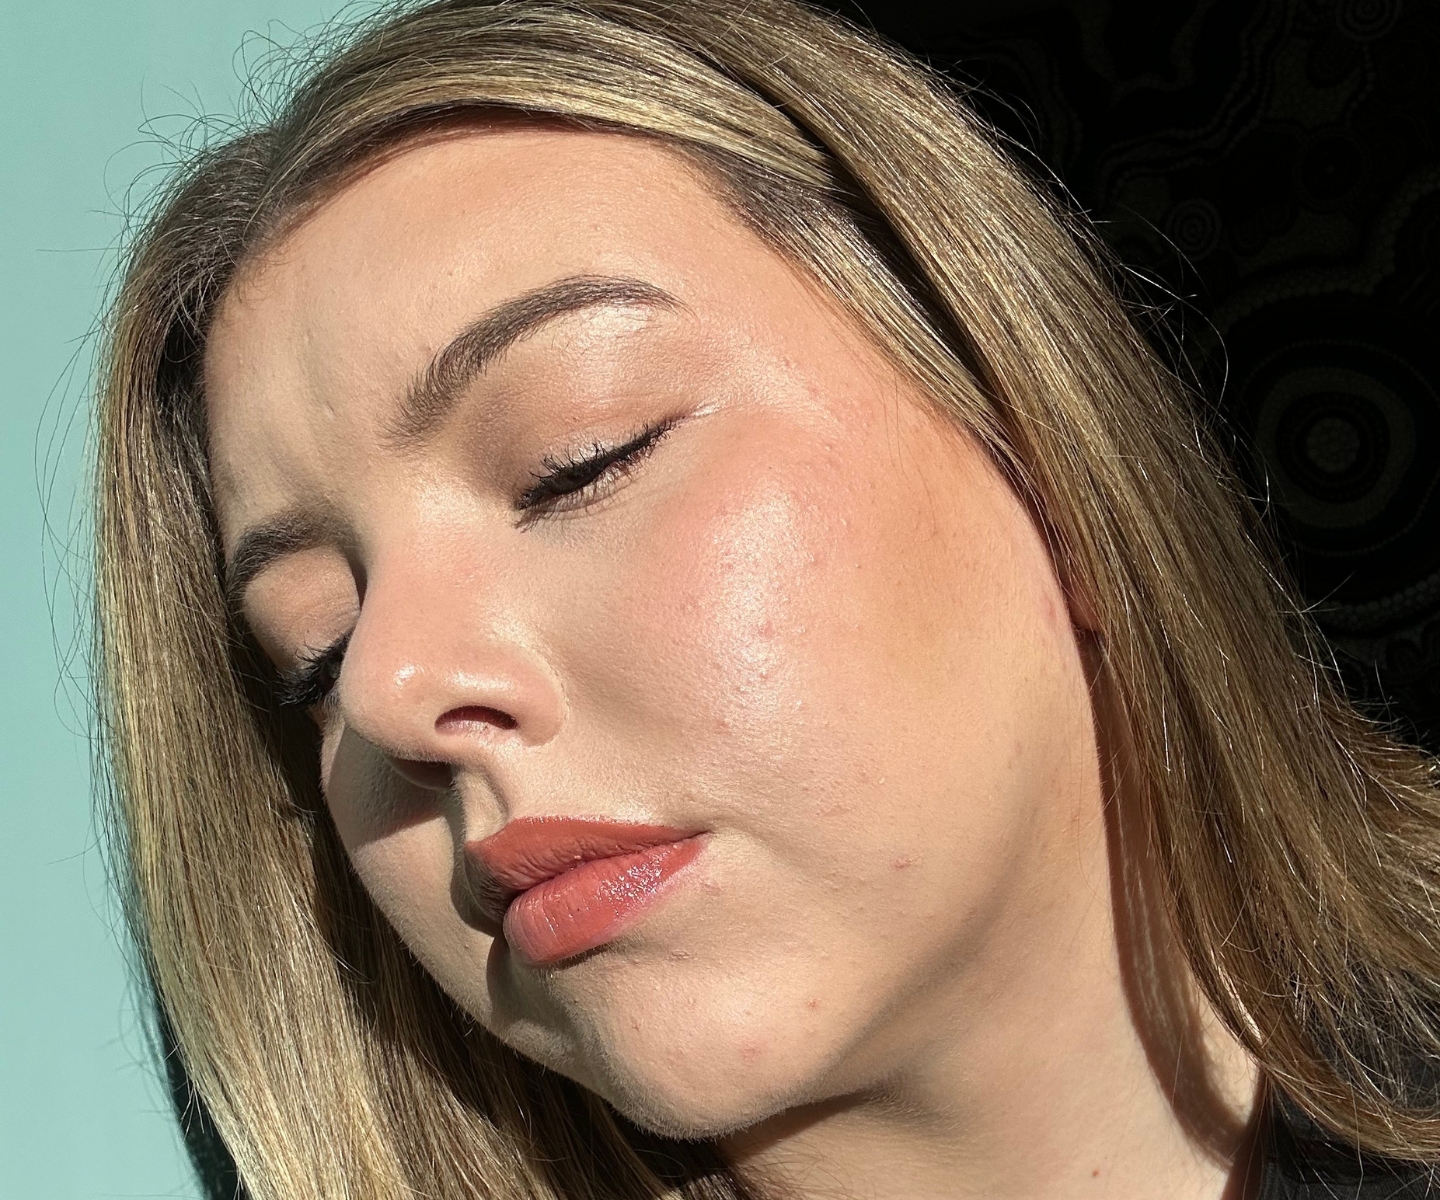 Maybelline Skin Tint Maddy selfie sunlight in-article